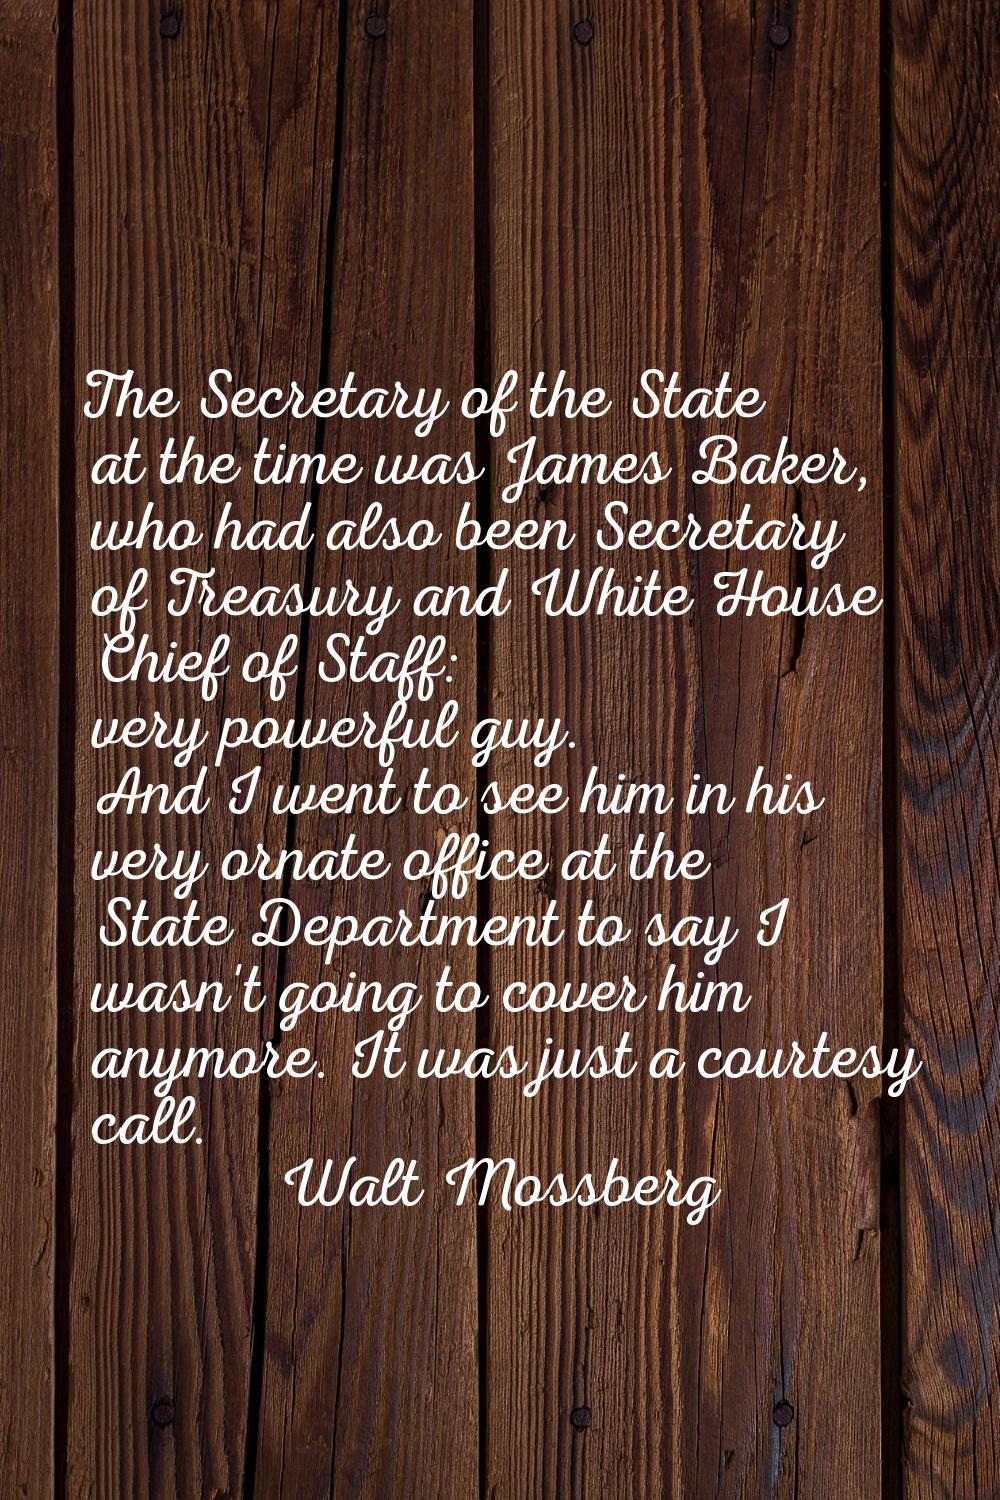 The Secretary of the State at the time was James Baker, who had also been Secretary of Treasury and